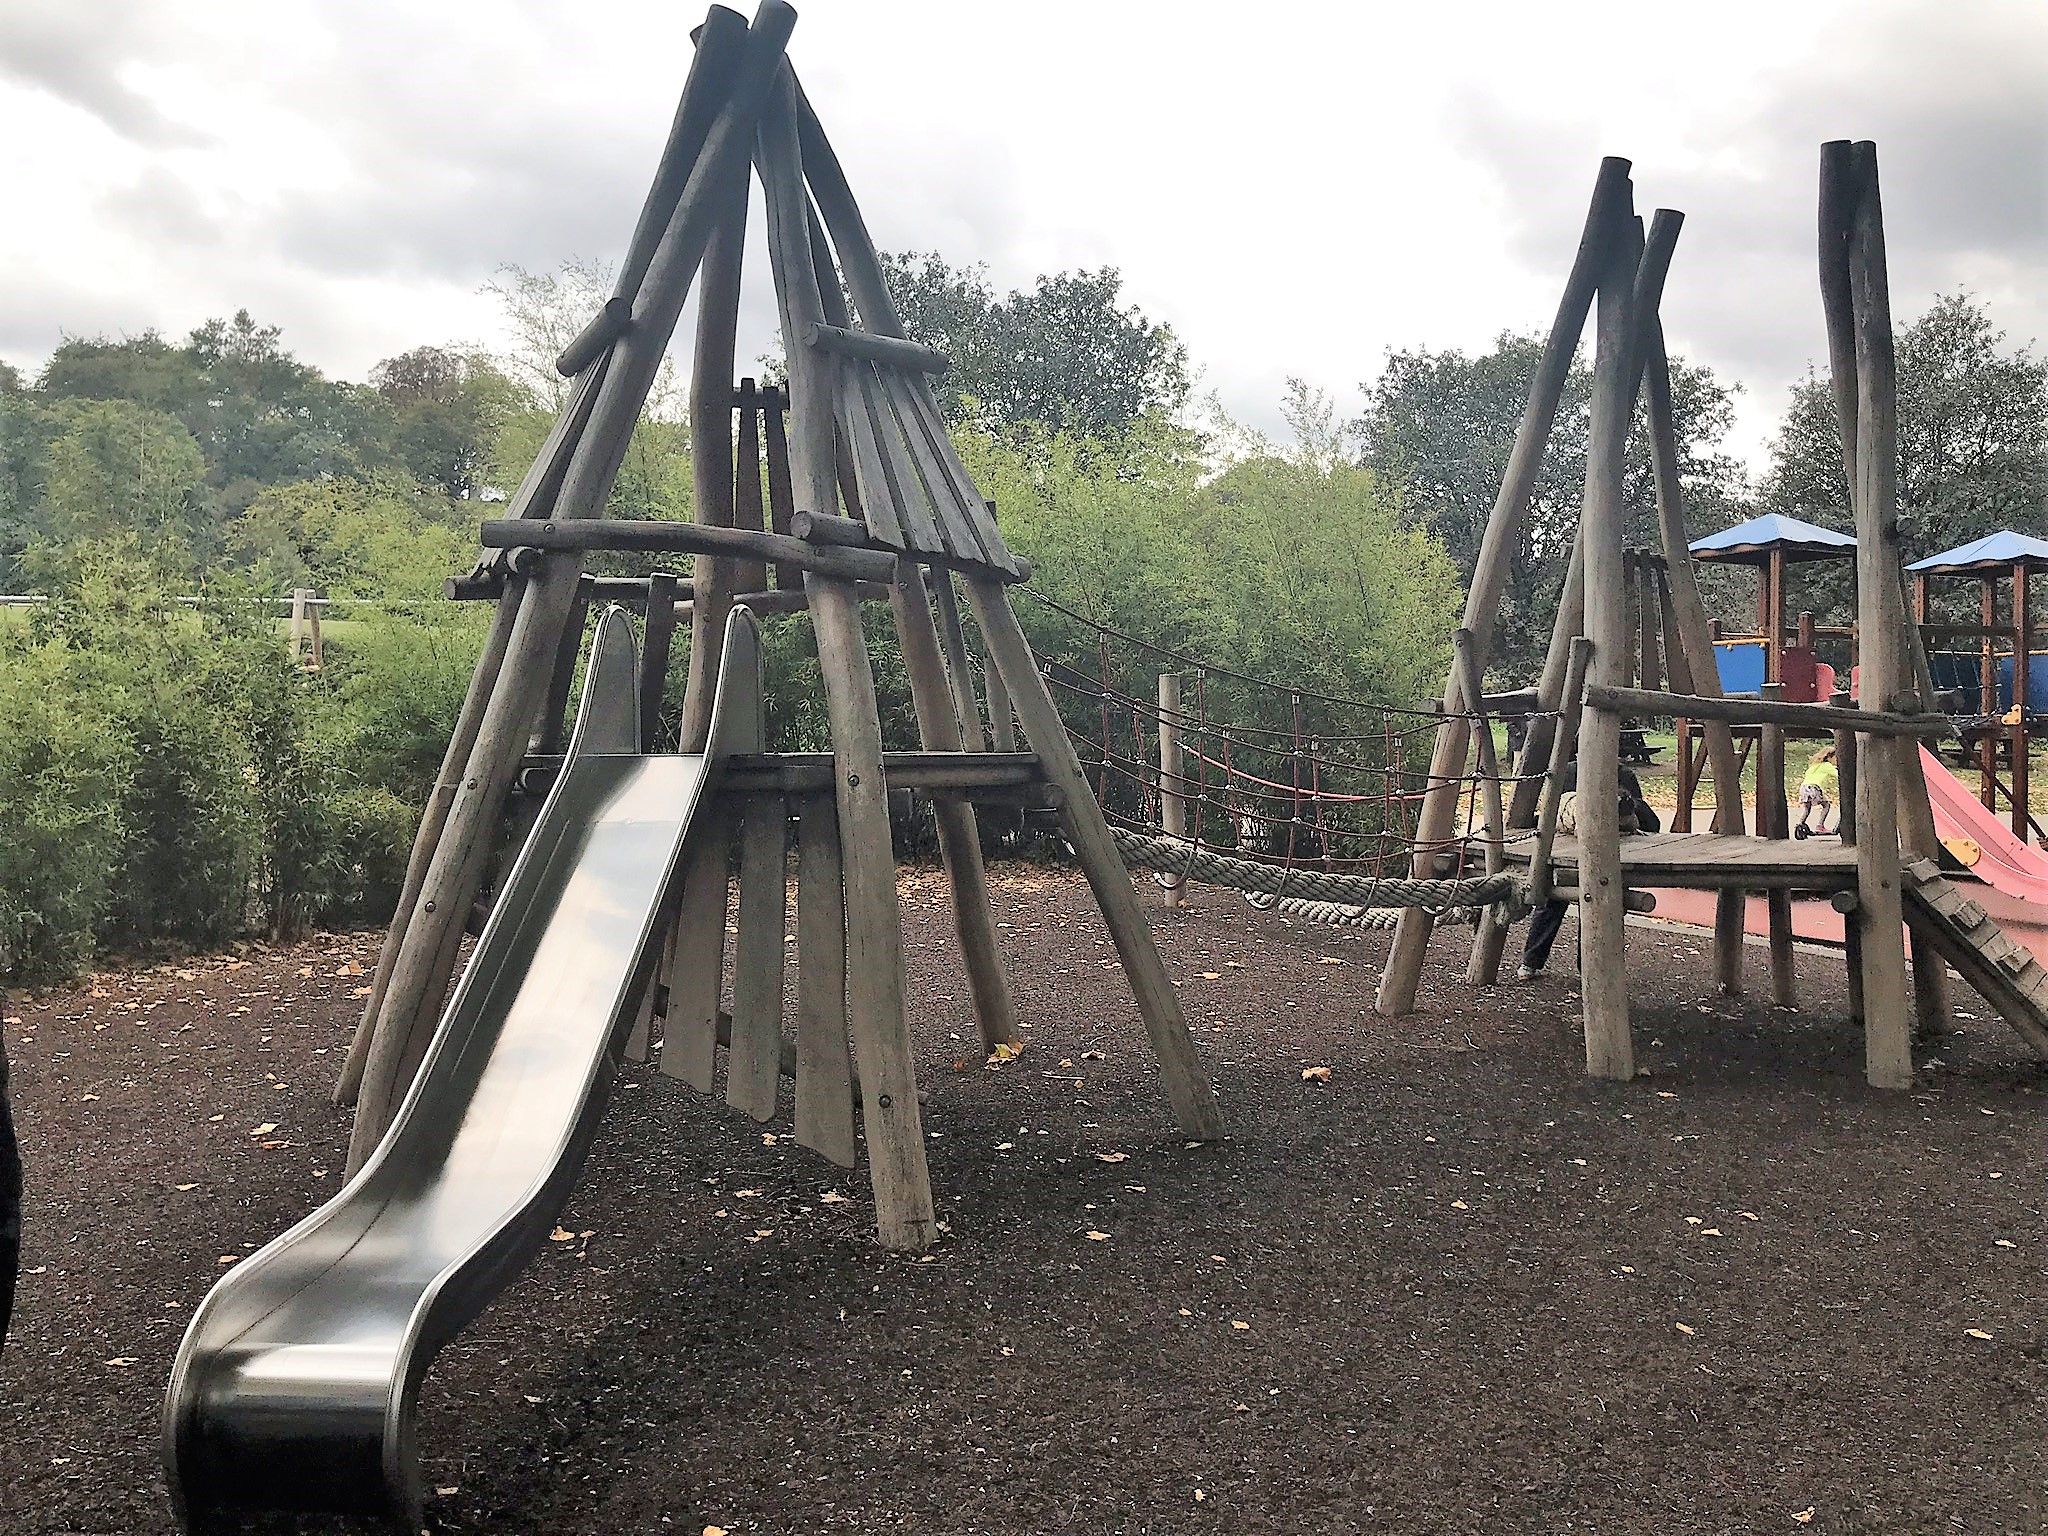 One of the clinmbing frames in the play area at Greenwich Park